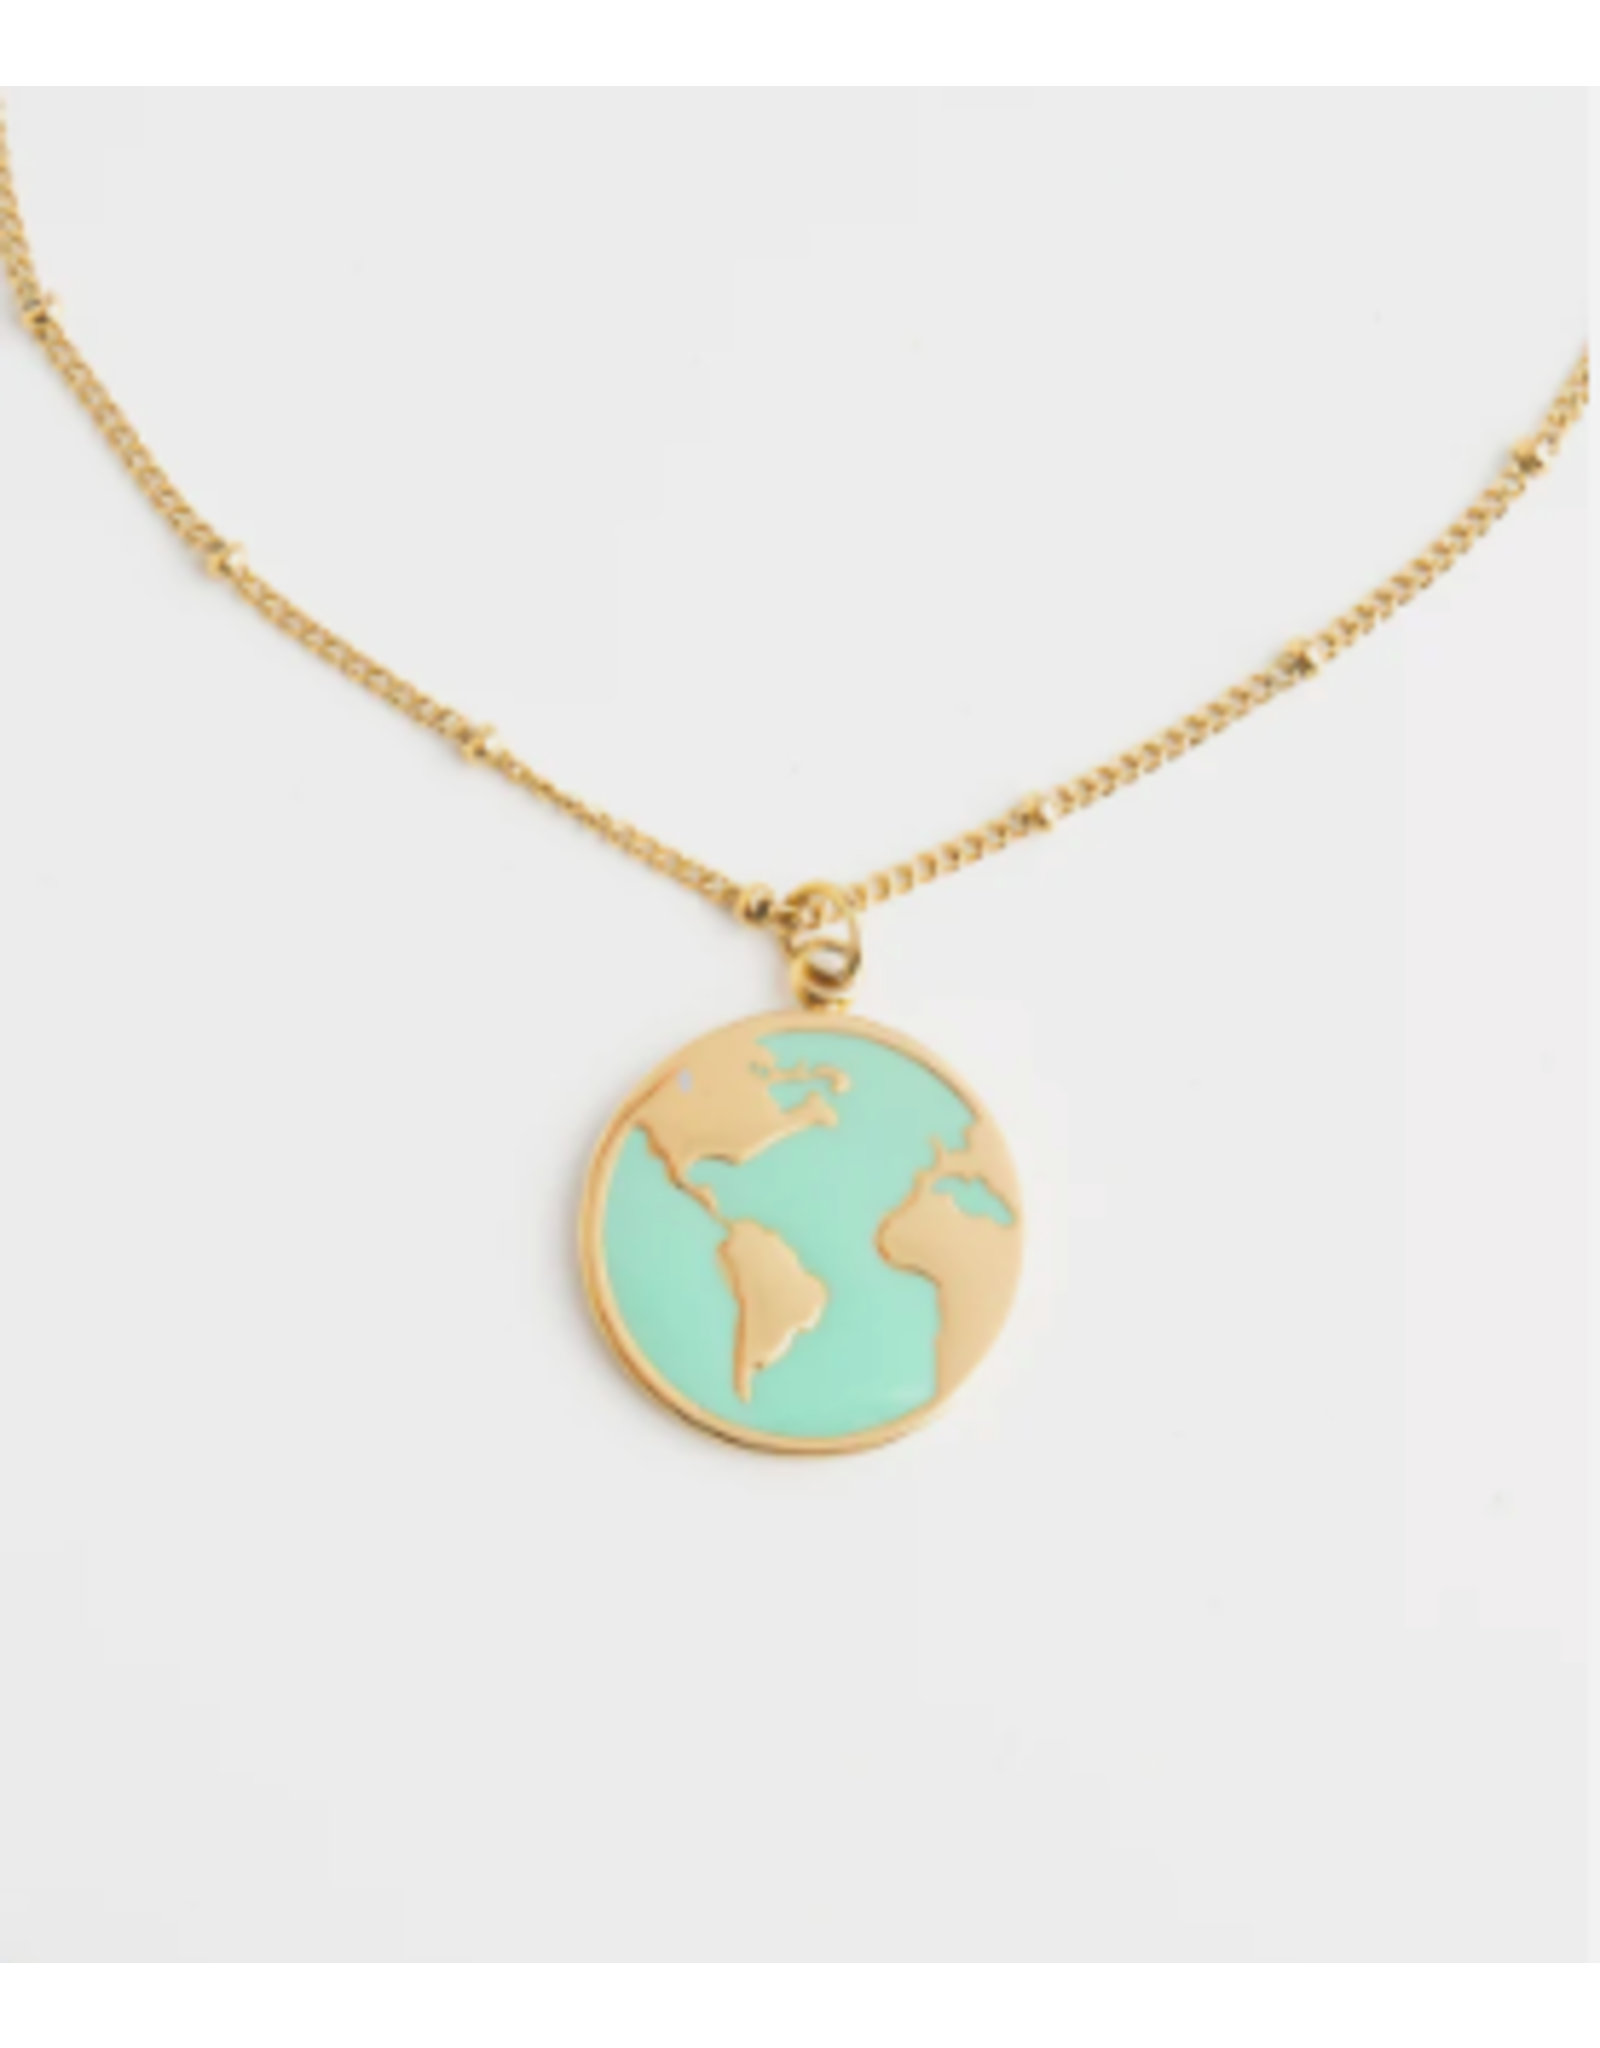 Trade roots Wandered Necklace in Ocean Blue, Asia